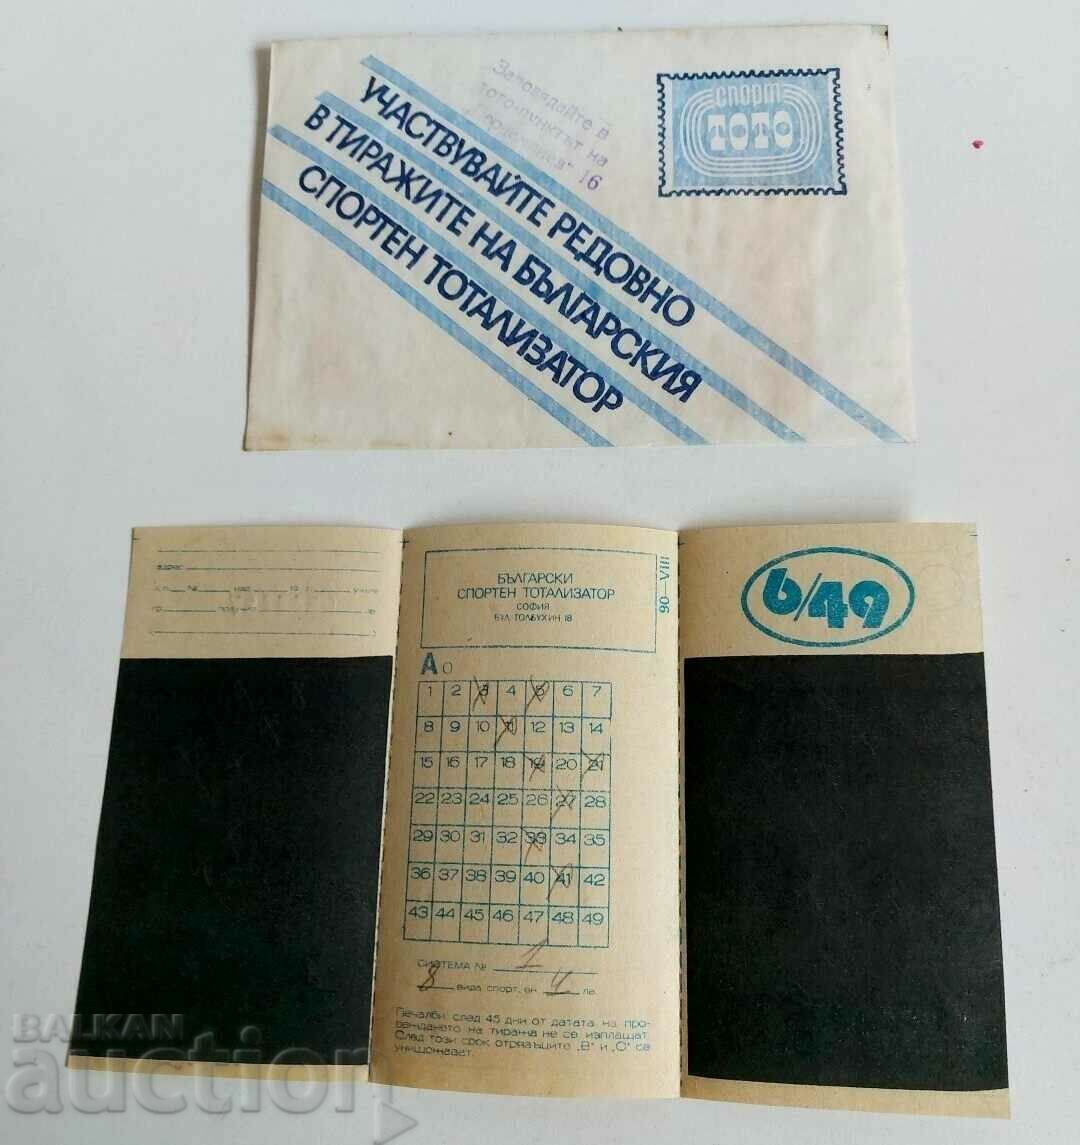 SOC TOTO TICKET 6/49 COMPLETED ENVELOPE SPORTS TOTALIZER